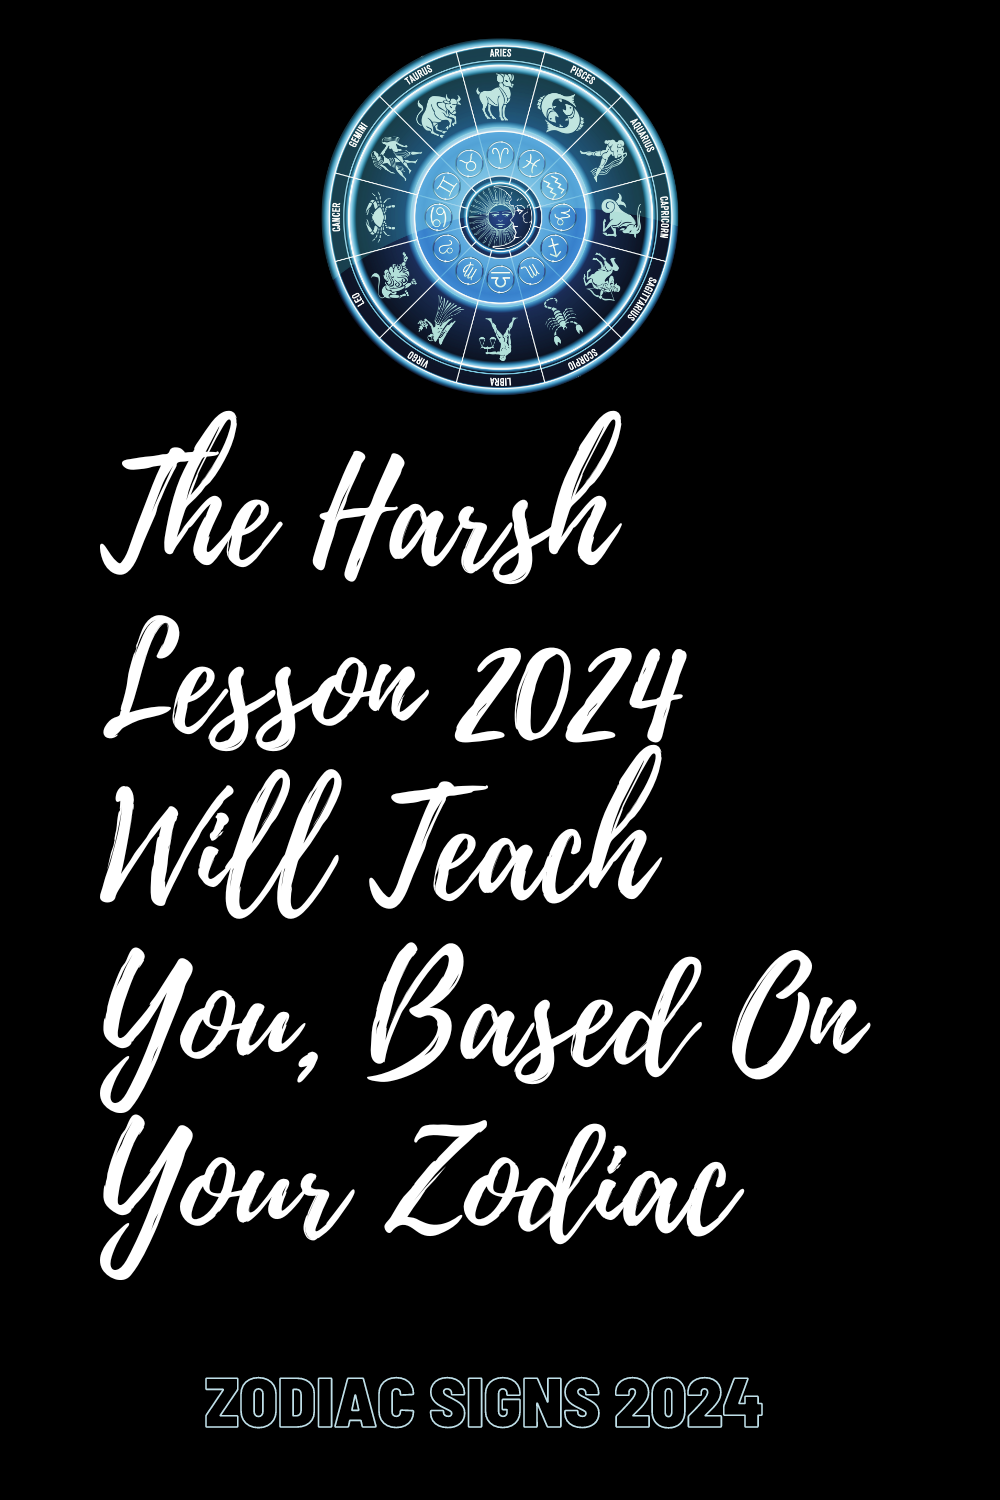 The Harsh Lesson 2024 Will Teach You, Based On Your Zodiac